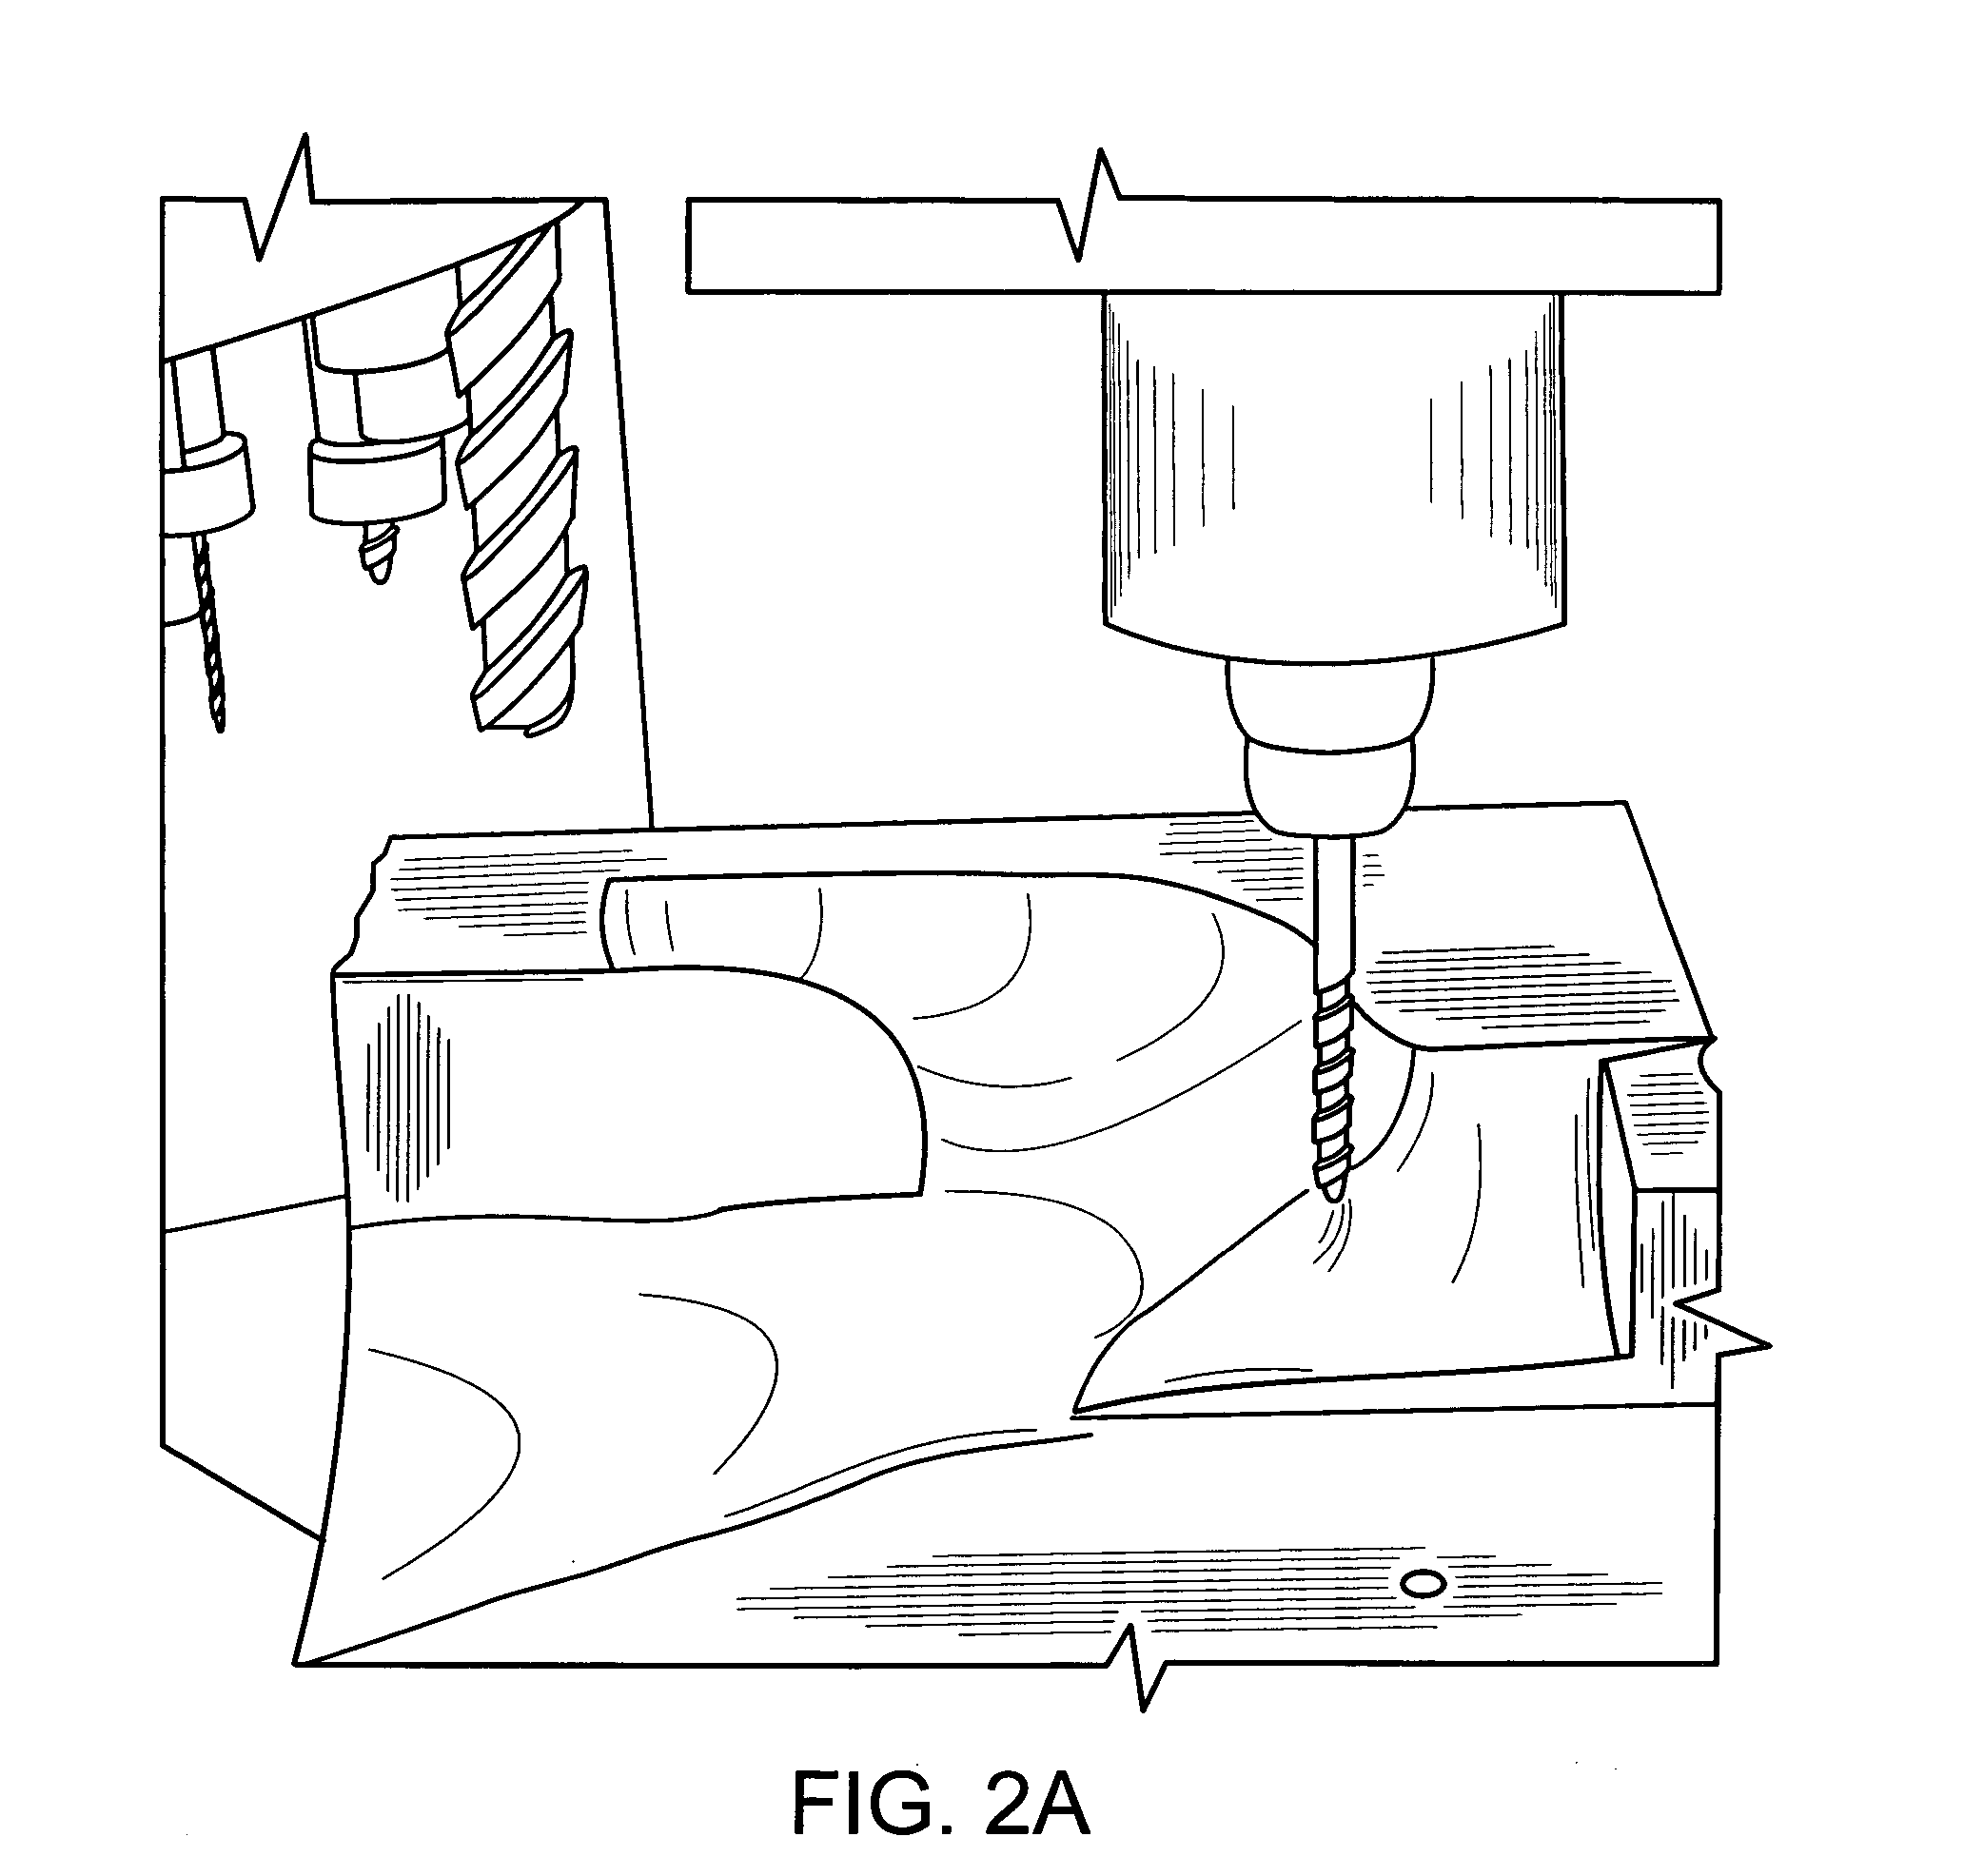 Device and method for medical training and evaluation